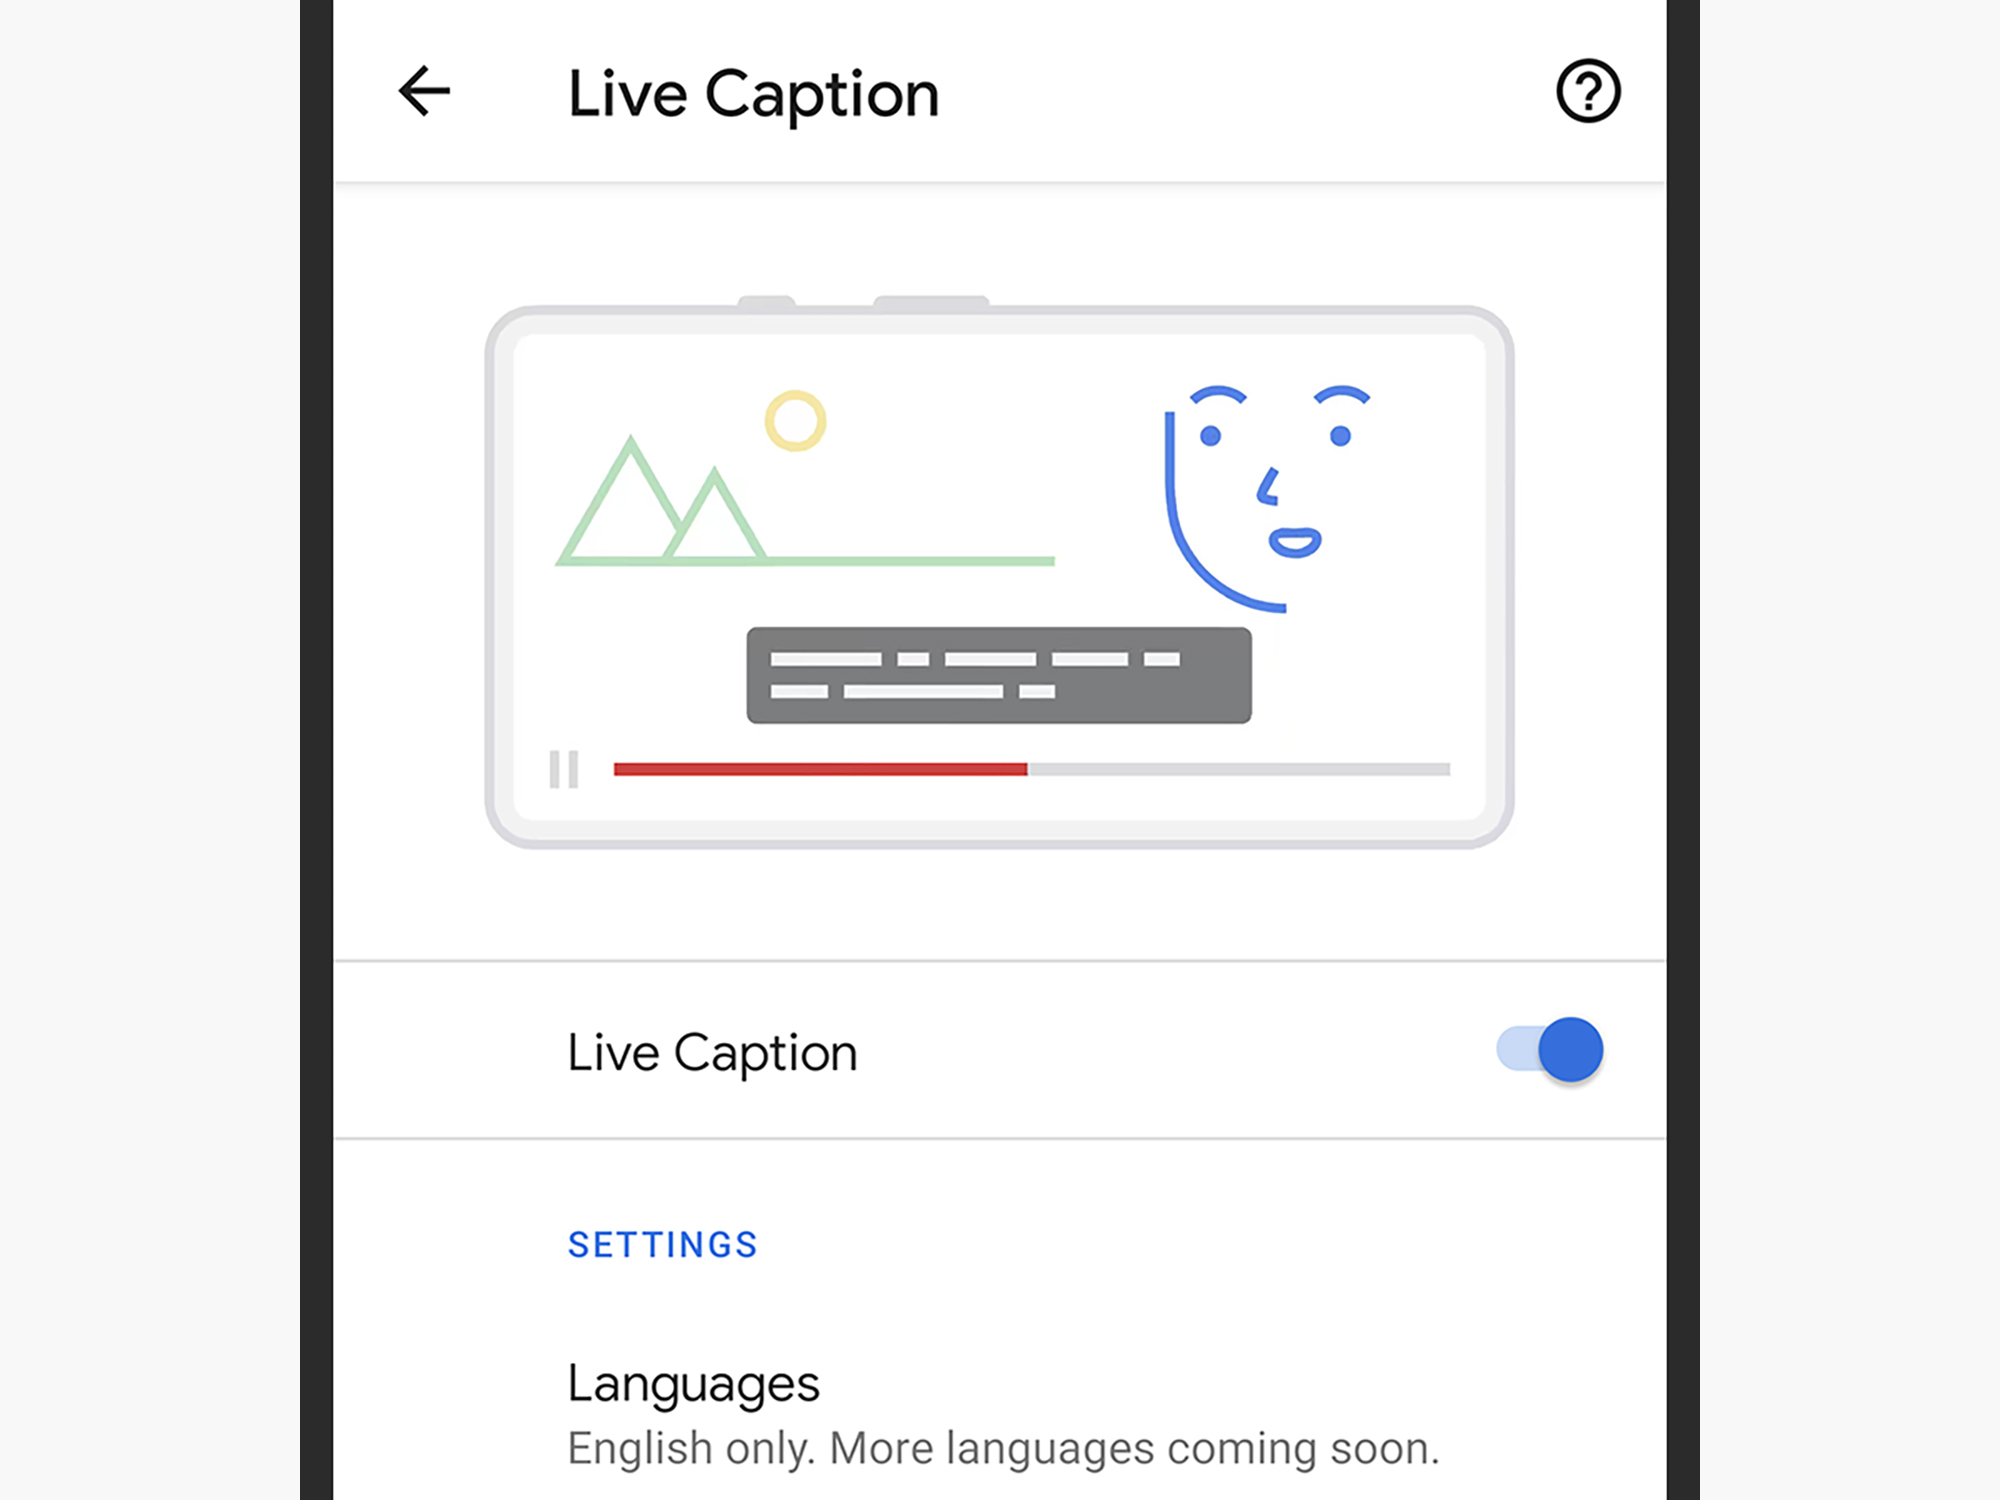 The user interface for enabling Google Live Caption on a phone